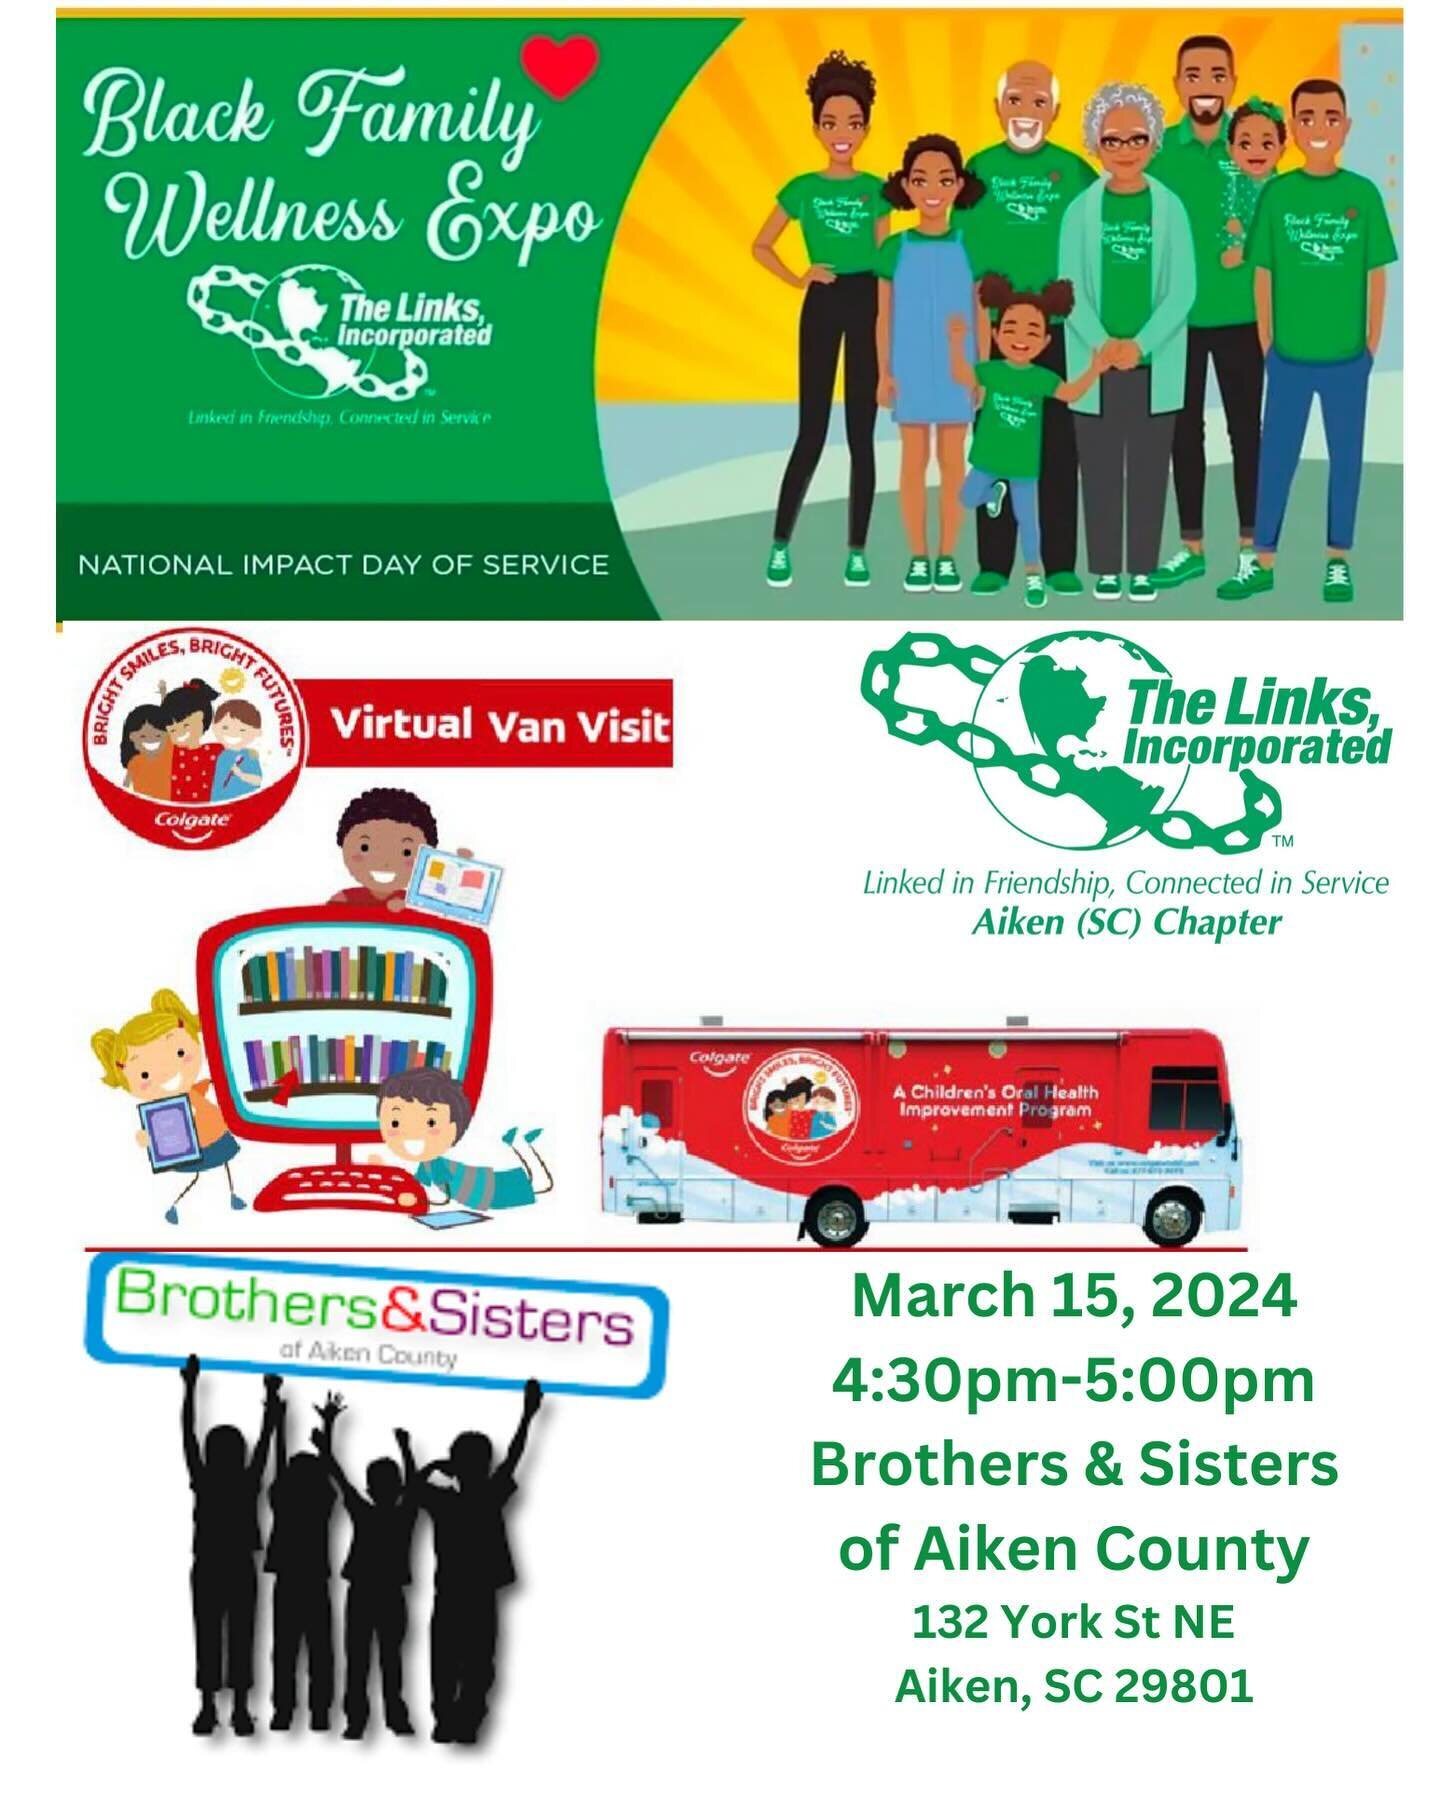 Aiken (SC) Chapter of The Links, Incorporated will be partnering with Brothers &amp; Sisters of Aiken County to support our National Impact Day of Service #linksbfwe